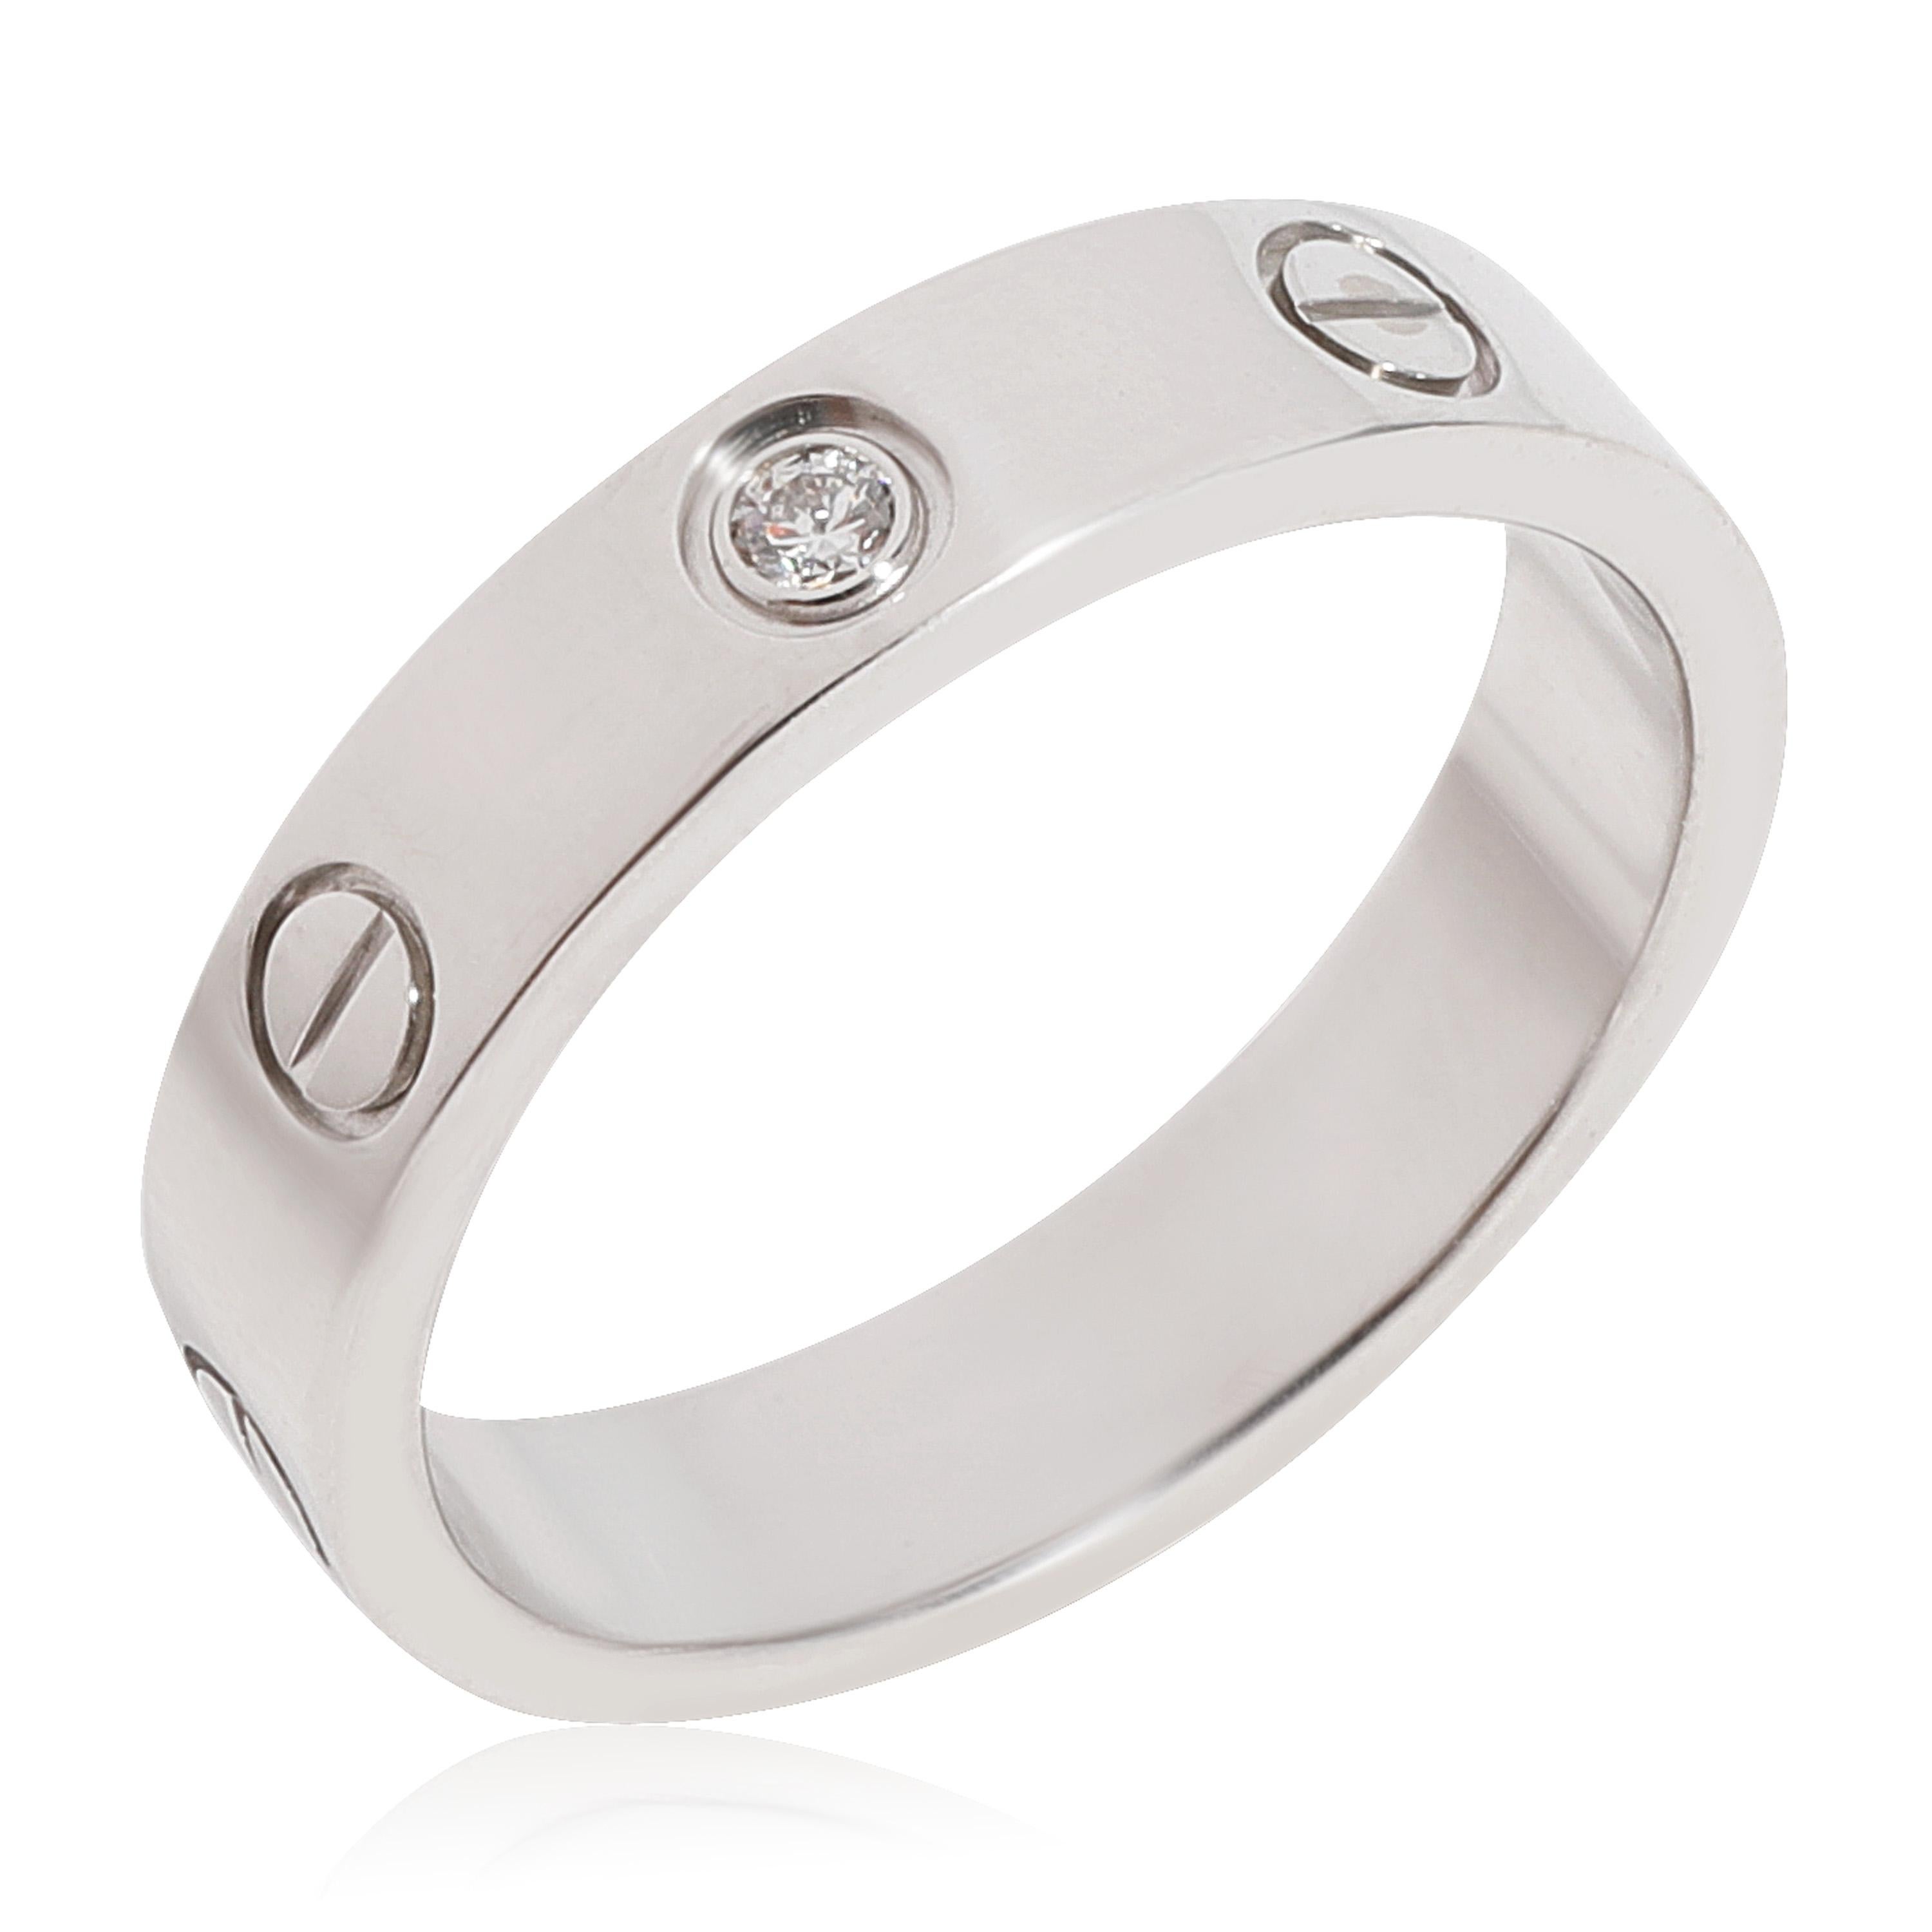 Cartier Love Diamond Wedding Band in 18k White Gold 0.02 CTW

PRIMARY DETAILS
SKU: 118259
Listing Title: Cartier Love Diamond Wedding Band in 18k White Gold 0.02 CTW
Condition Description: Retails for 2370 USD. In excellent condition and recently